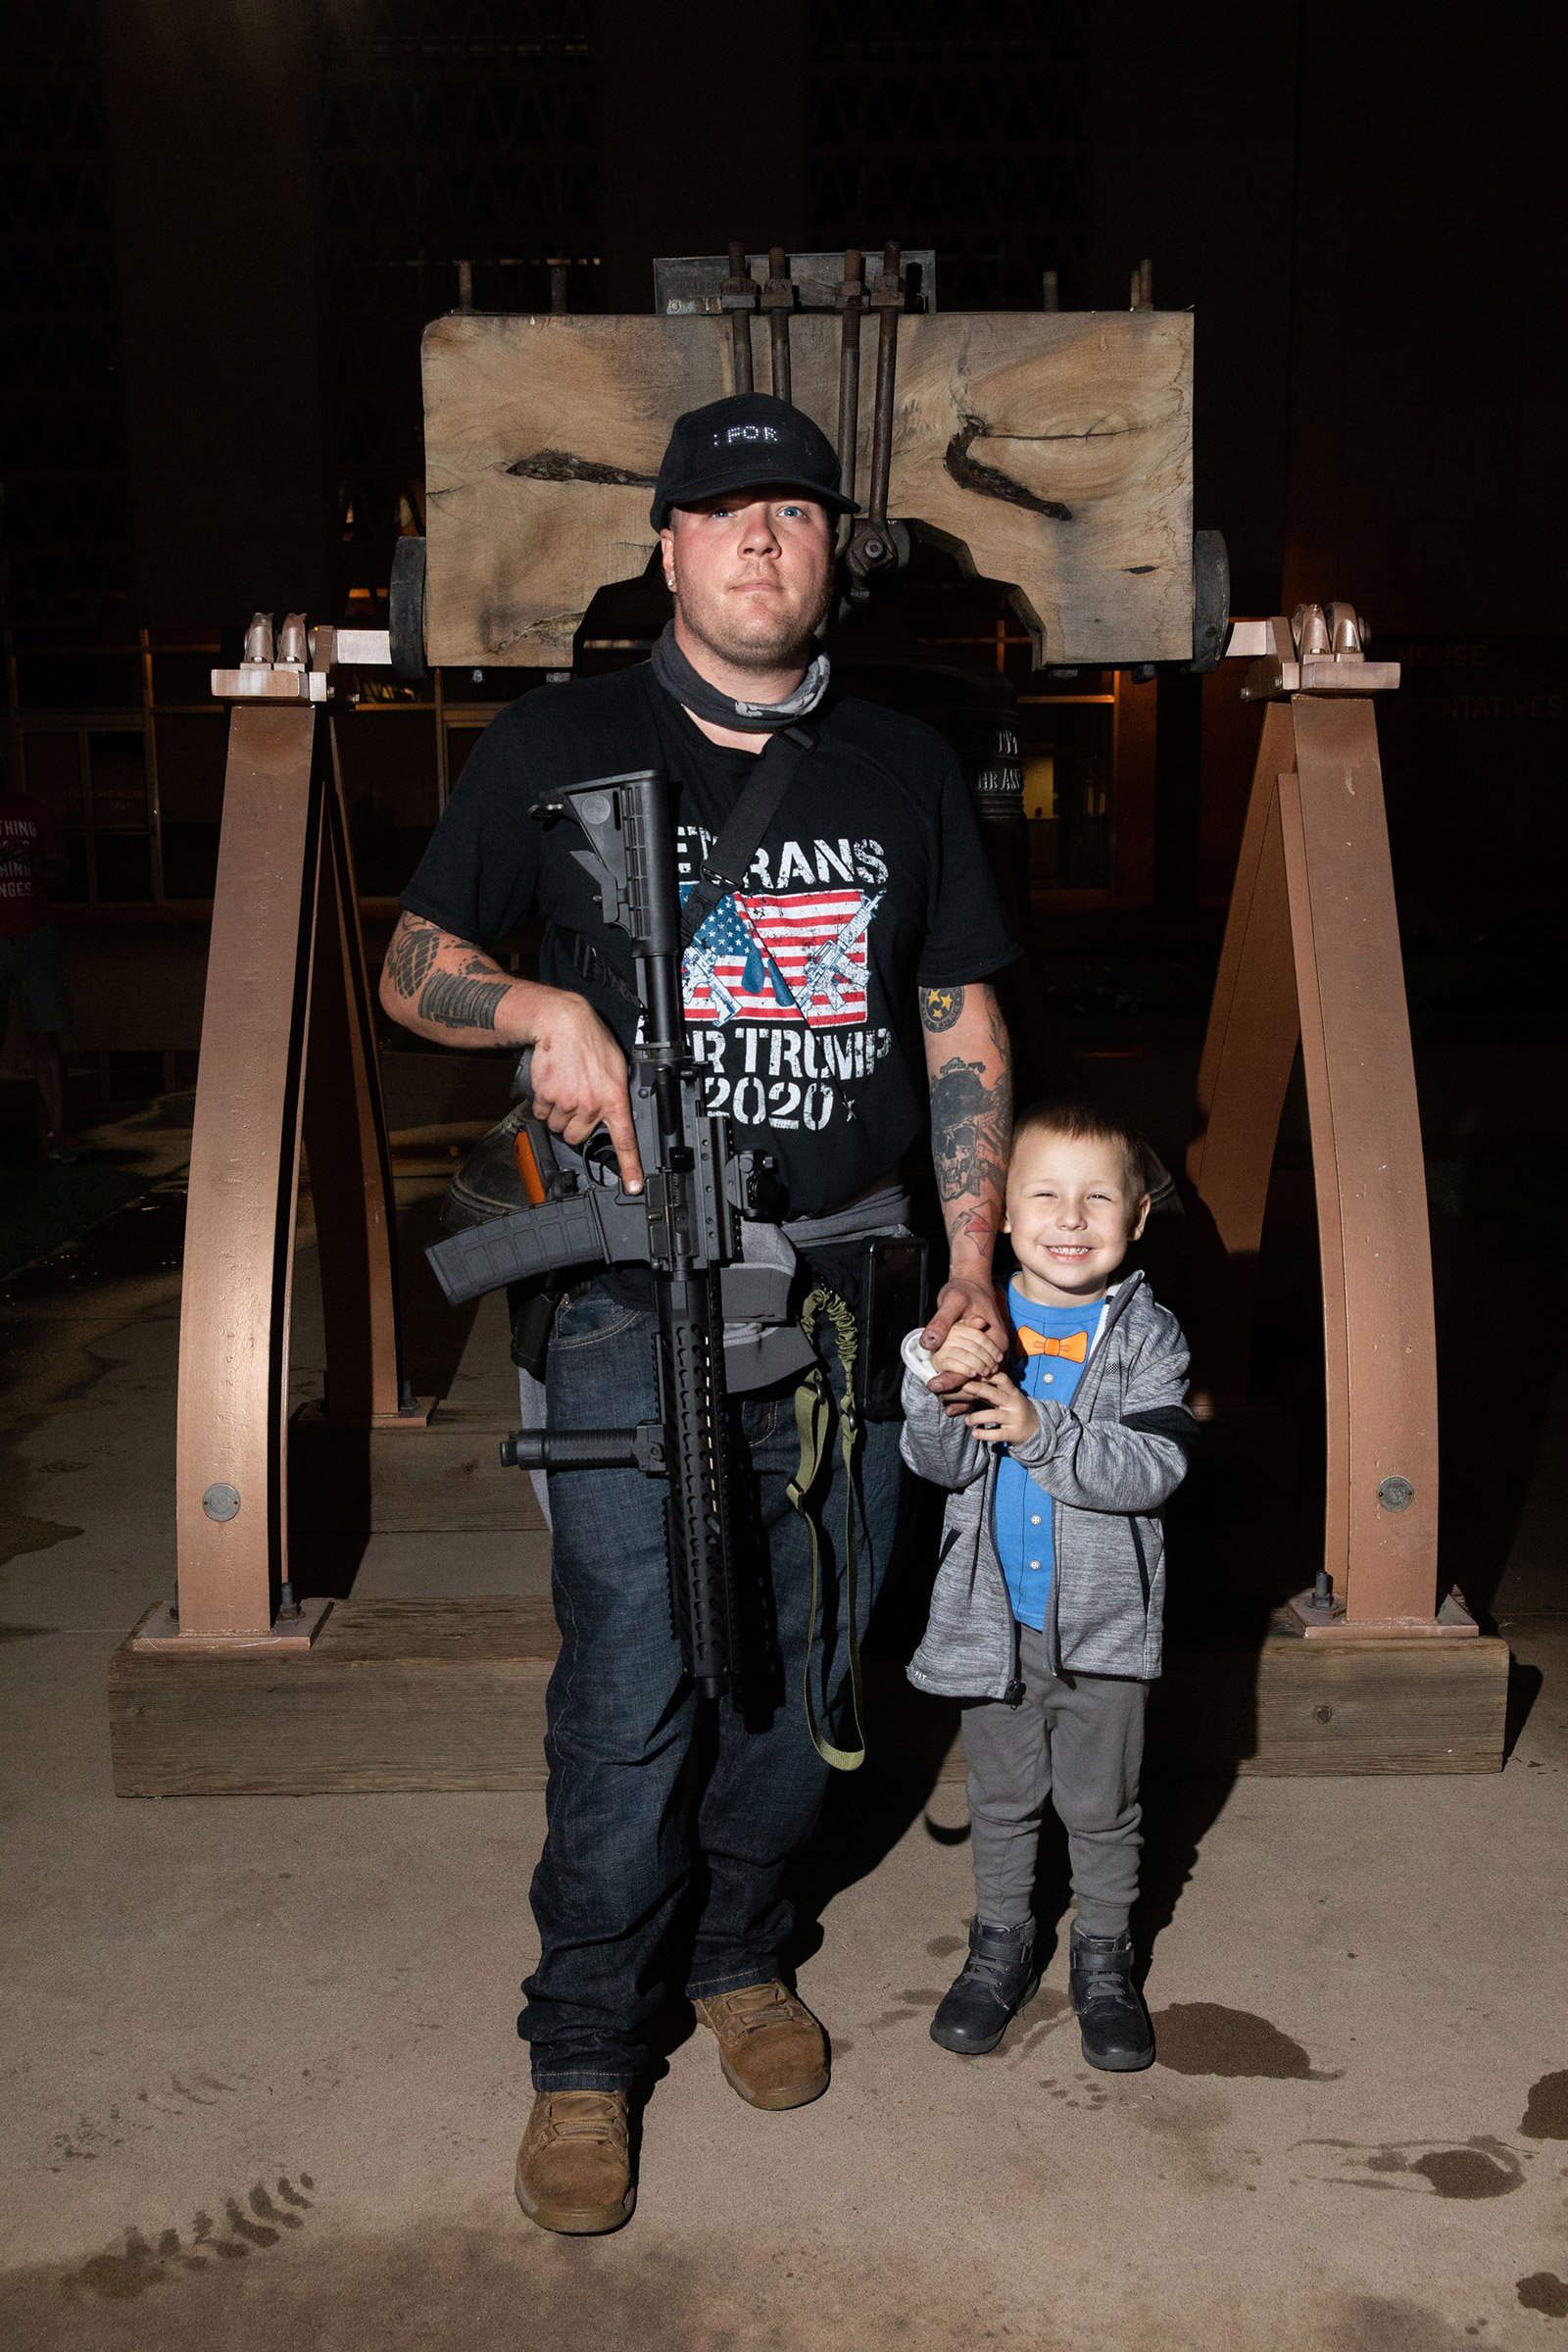 Aiden and his son at the Arizona State Capitol in Phoenix, AZ on November 4, 2020